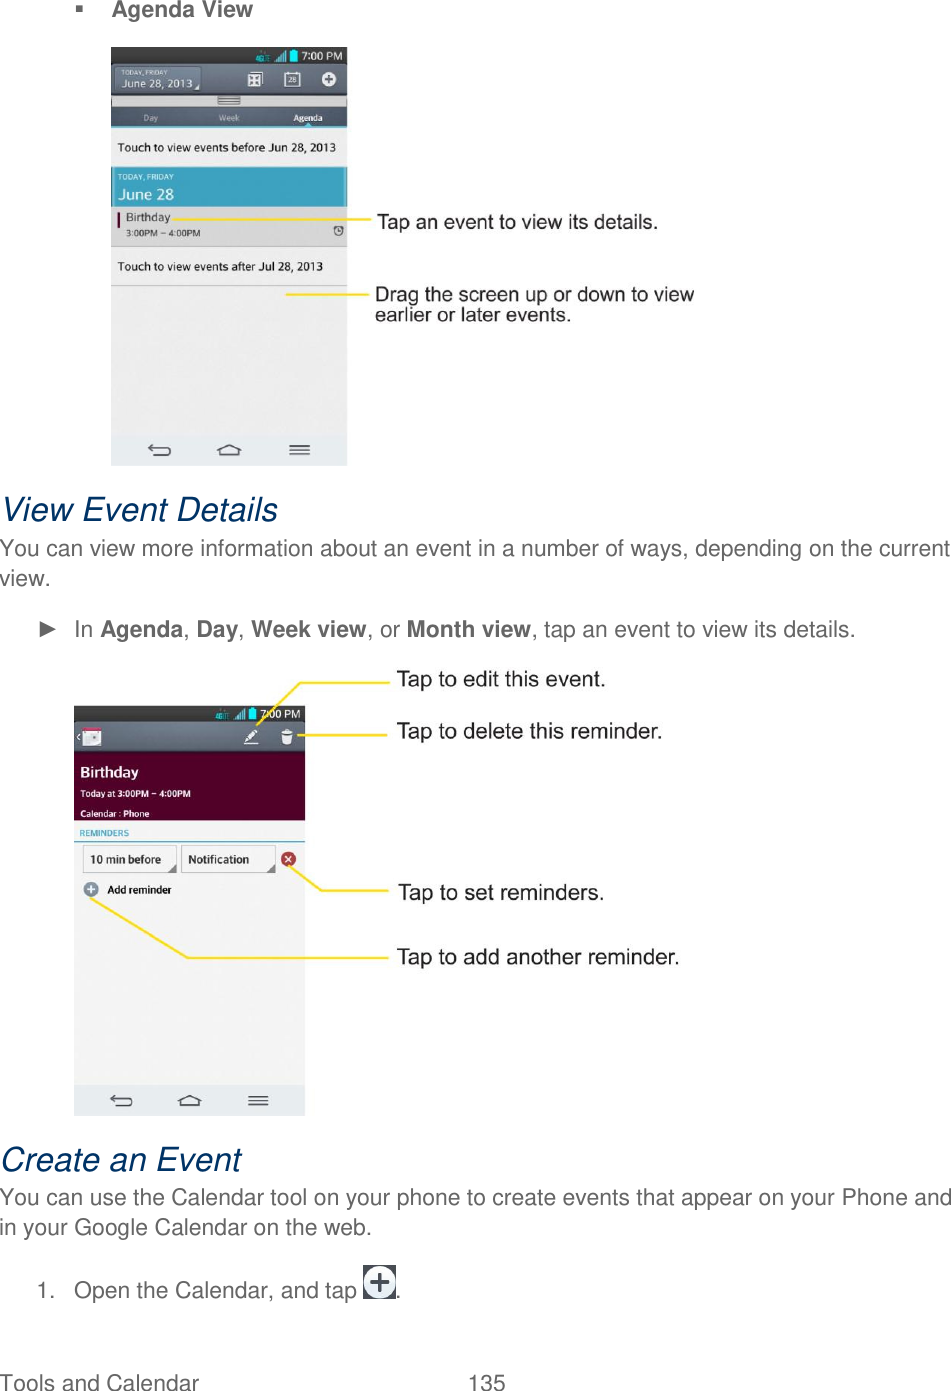  Tools and Calendar  135    Agenda View  View Event Details You can view more information about an event in a number of ways, depending on the current view. ►  In Agenda, Day, Week view, or Month view, tap an event to view its details.  Create an Event You can use the Calendar tool on your phone to create events that appear on your Phone and in your Google Calendar on the web. 1.  Open the Calendar, and tap  . 